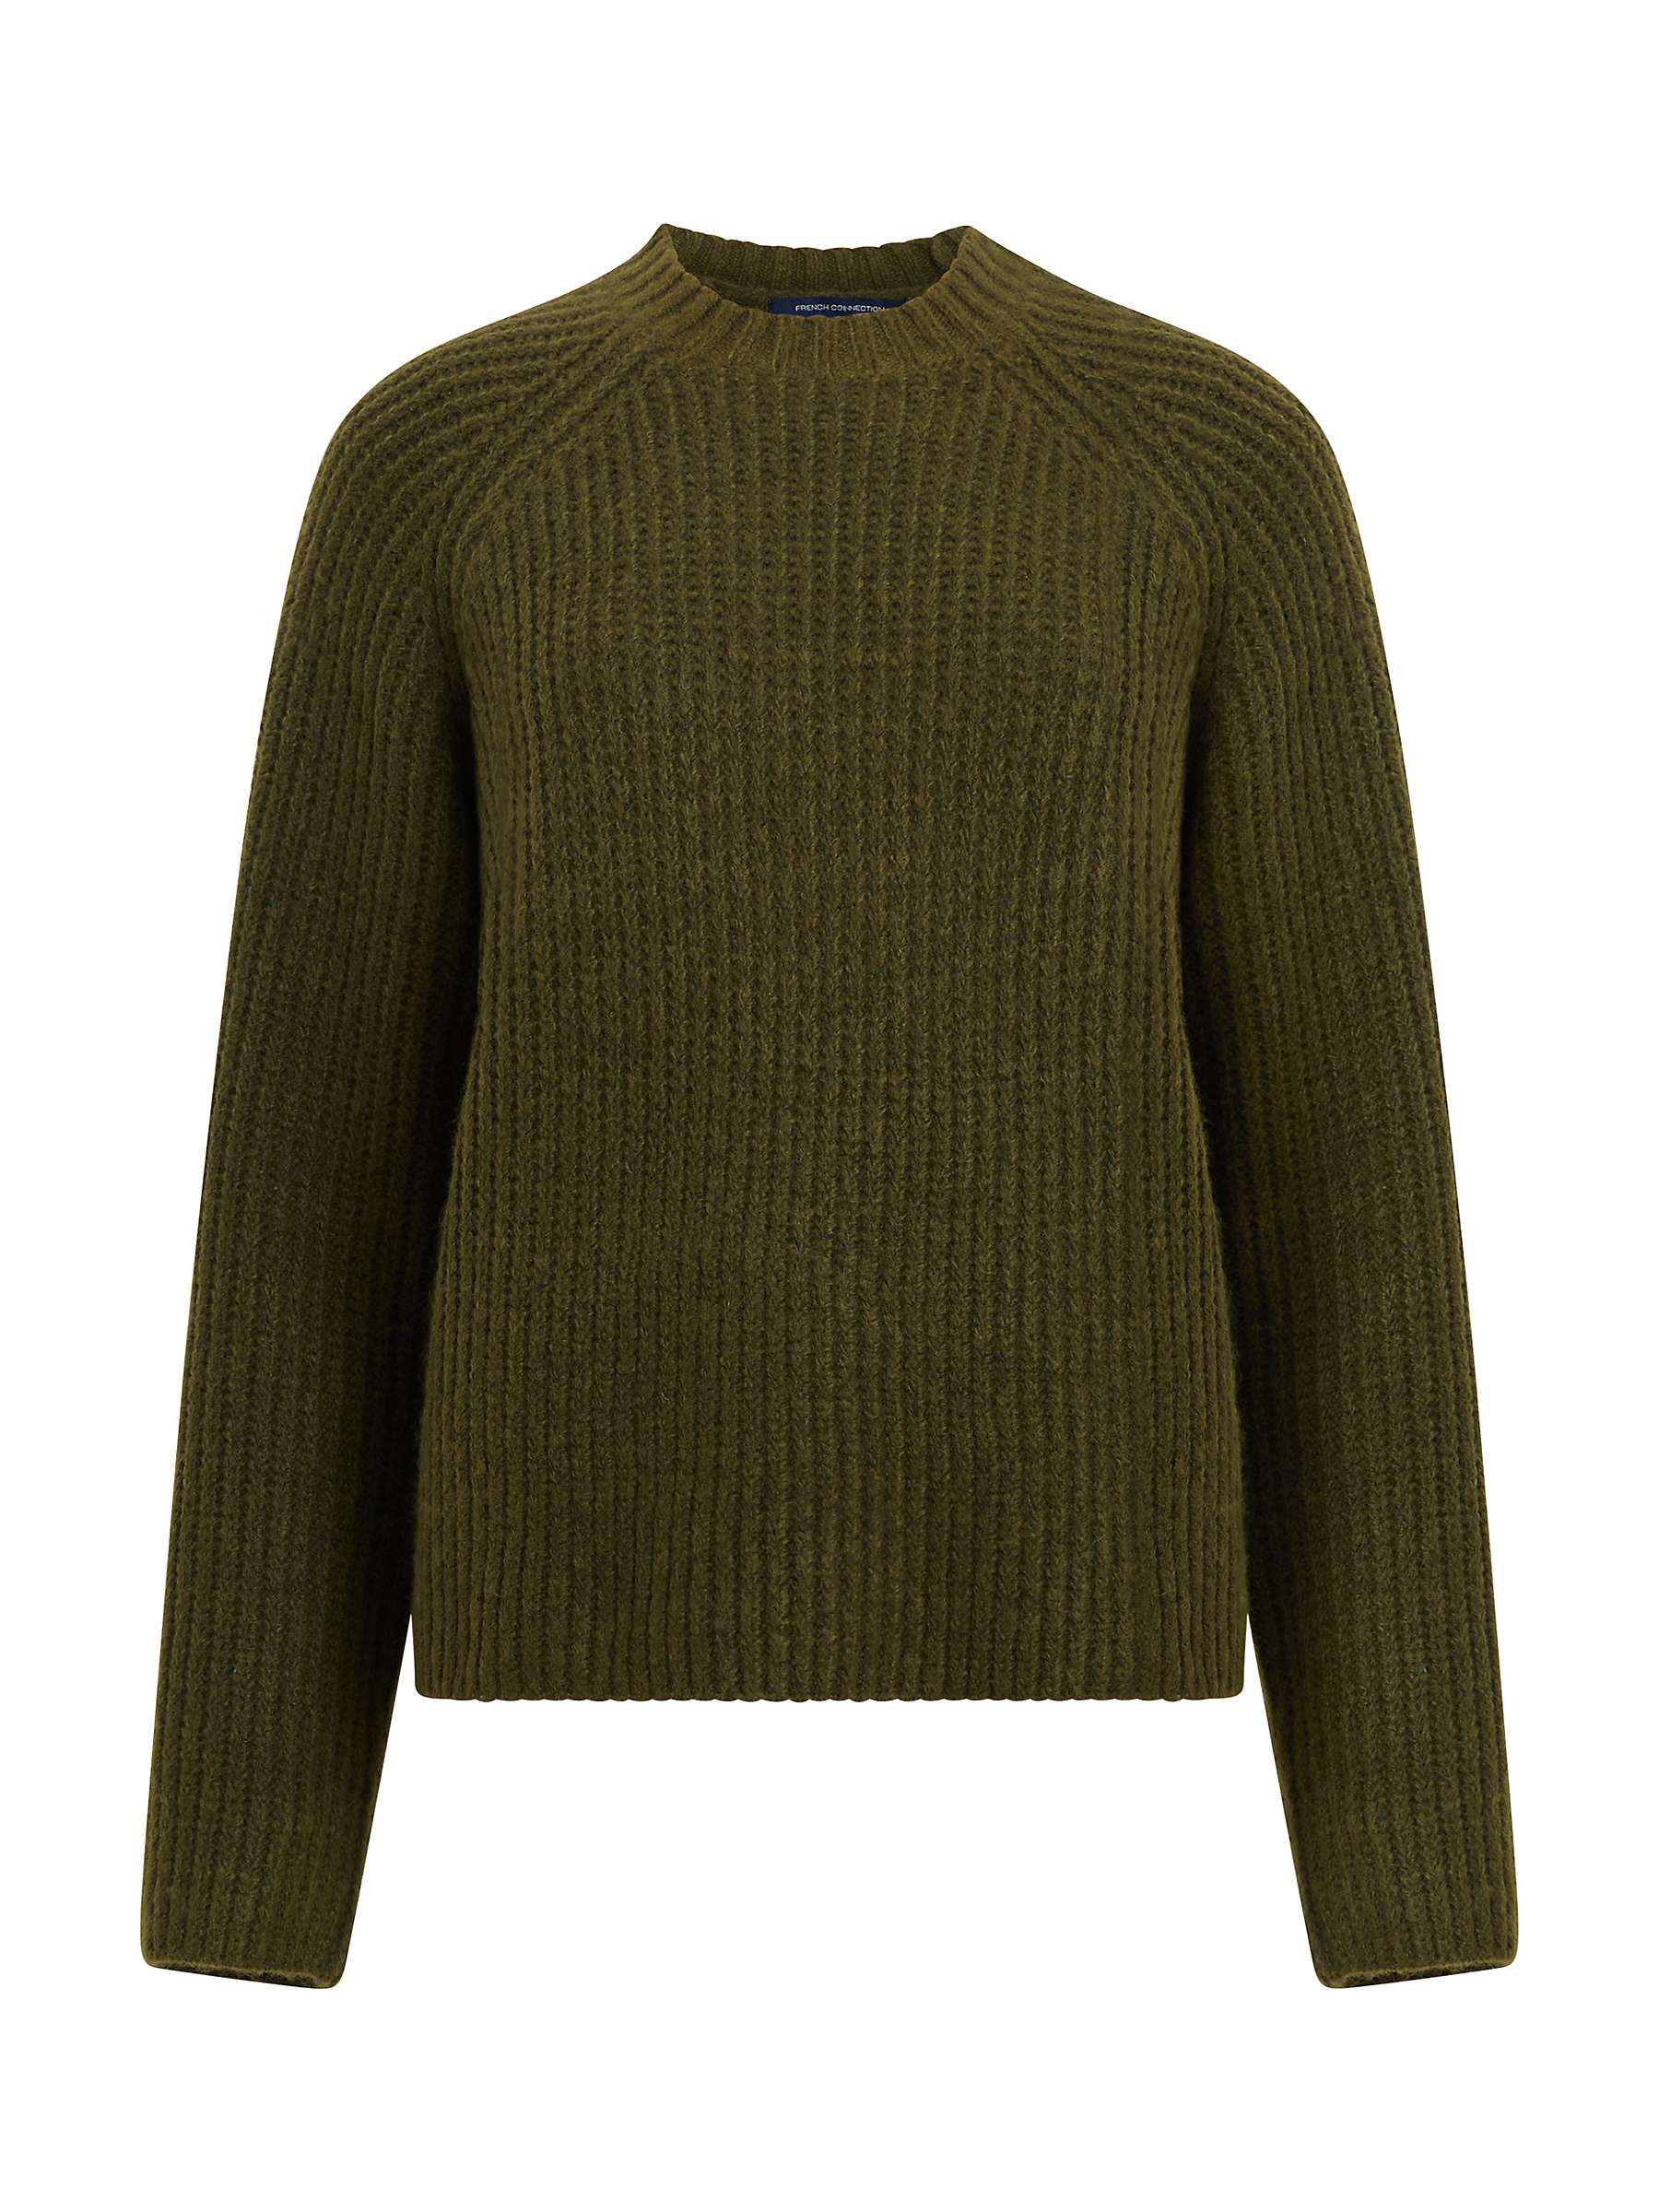 Buy French Connection Jika Jumper Online at johnlewis.com